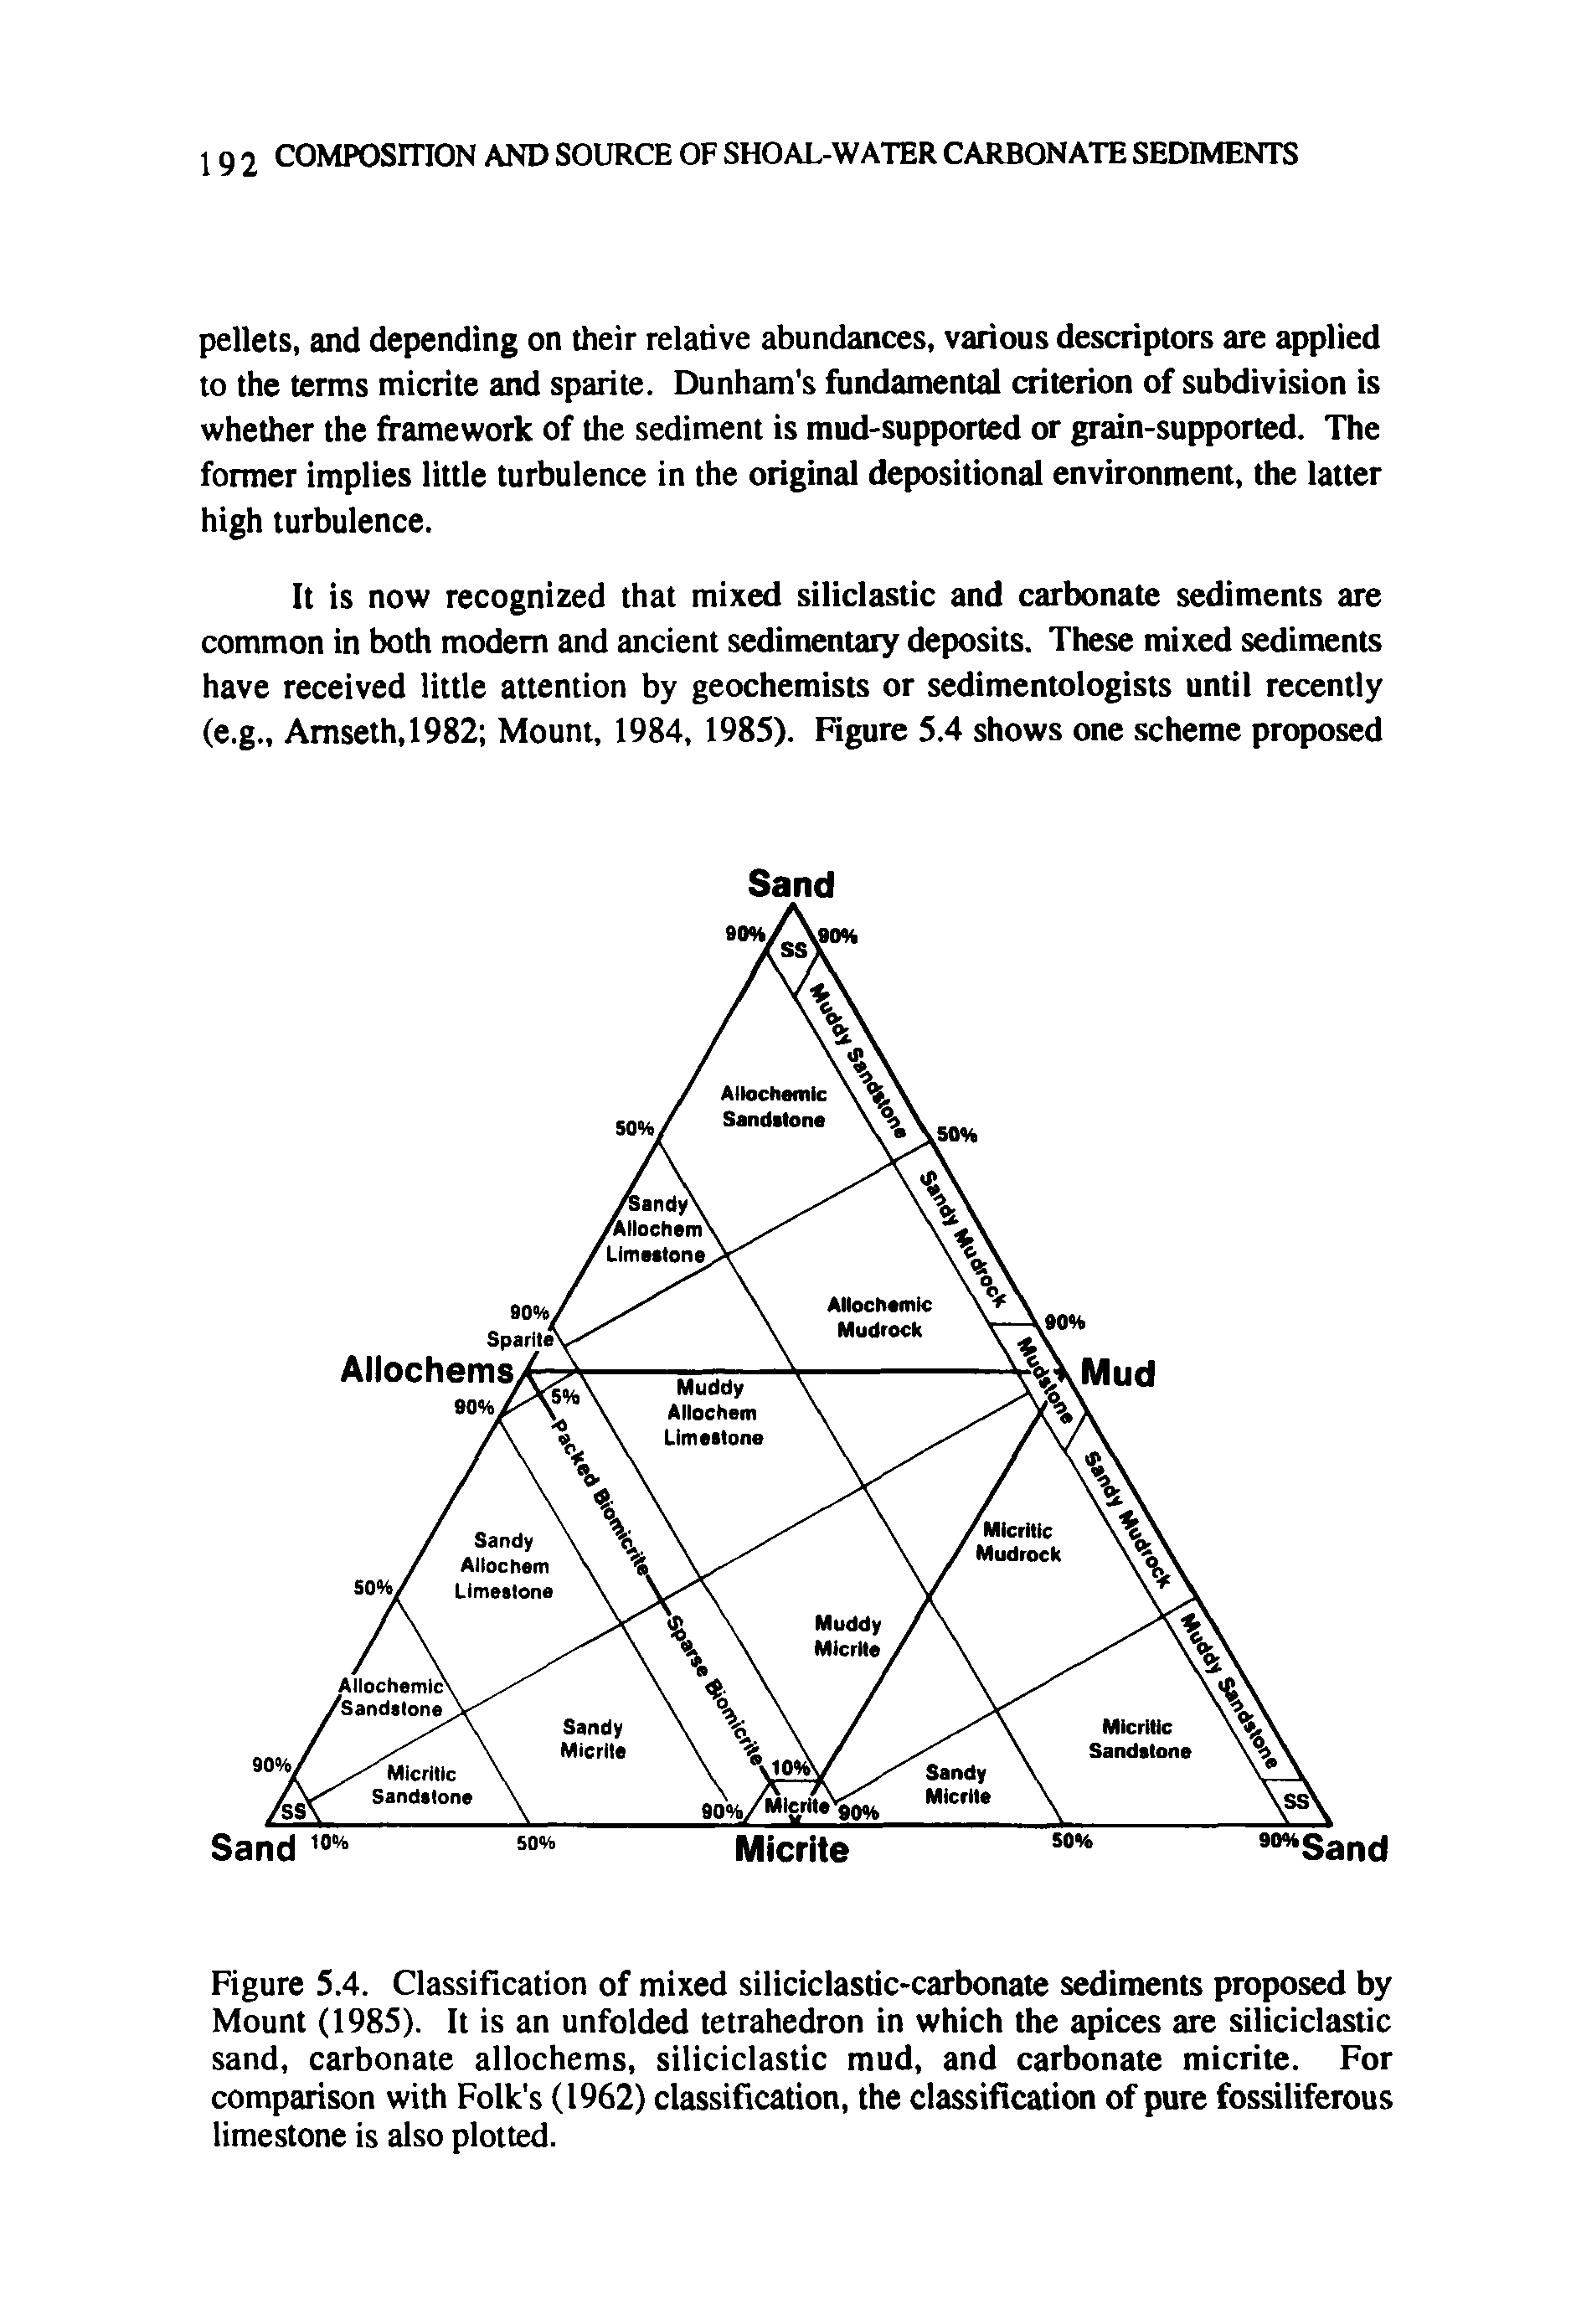 Figure 5.4. Classification of mixed siliciclastic-carbonate sediments proposed by Mount (1985). It is an unfolded tetrahedron in which the apices are siliciclastic sand, carbonate allochems, siliciclastic mud, and carbonate micrite. For comparison with Folk s (1962) classification, the classification of pure fossiliferous limestone is also plotted.